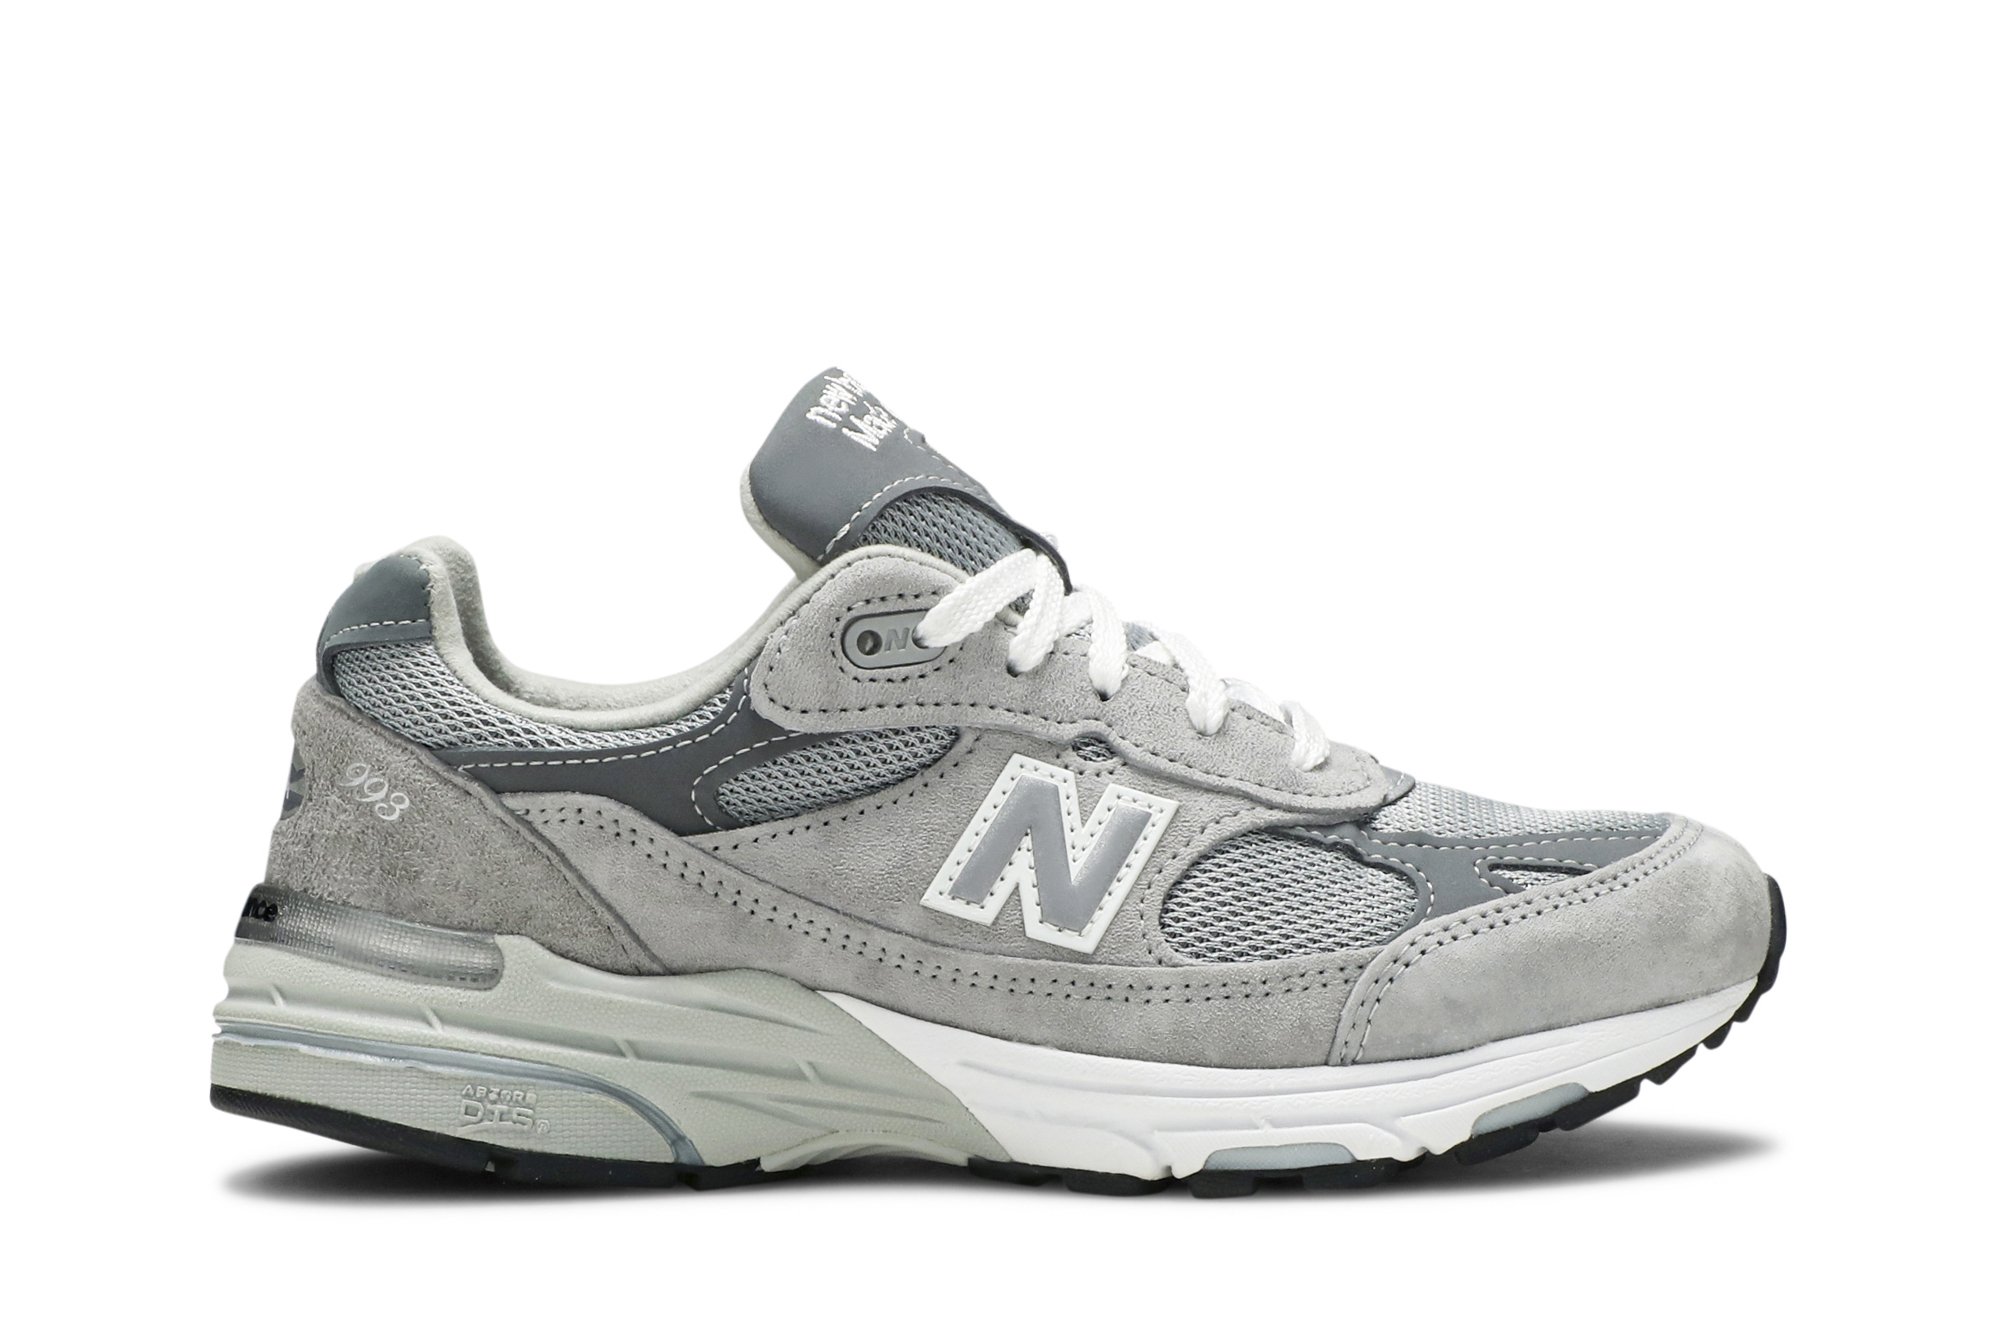 Buy Wmns 993 Made In USA 'Grey' - WR993GL - Grey | GOAT